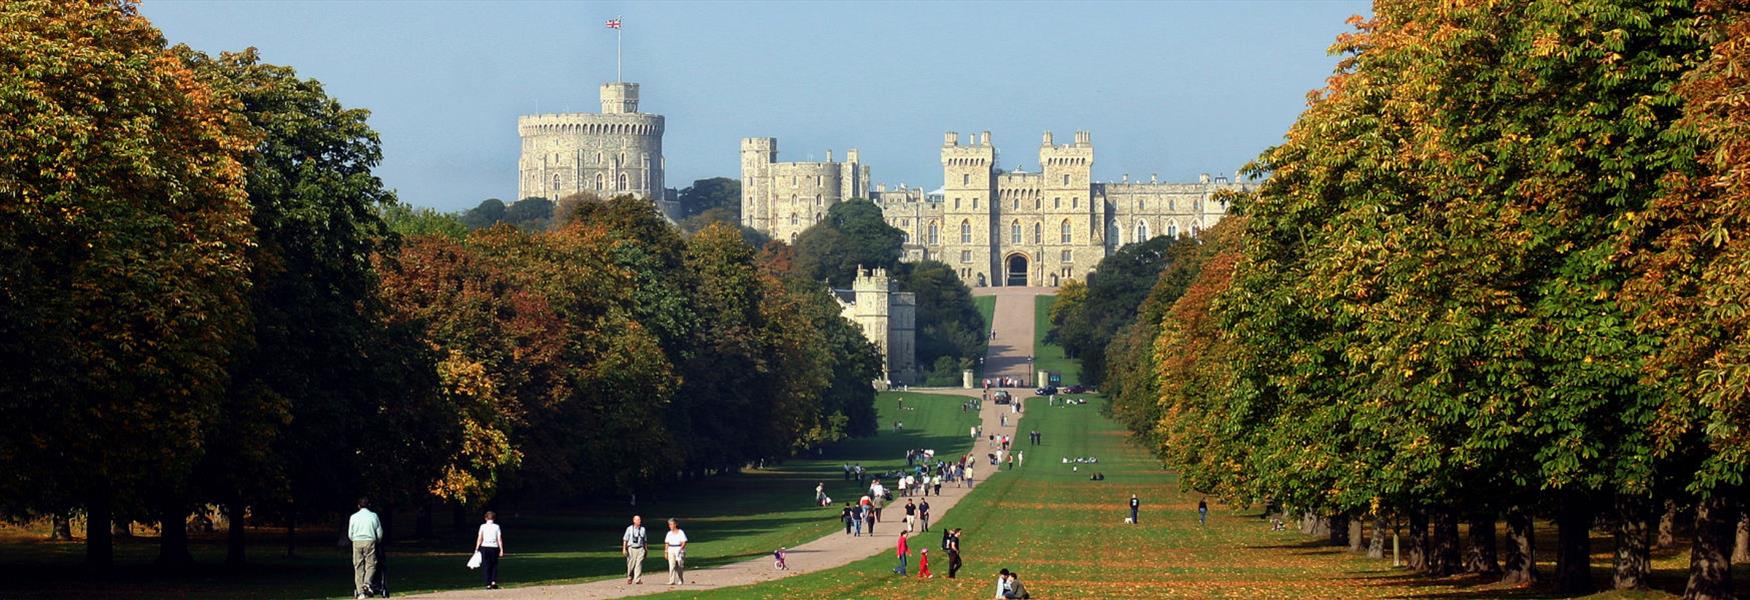 The Long Walk, Windsor Great Park, with view of Windsor Castle